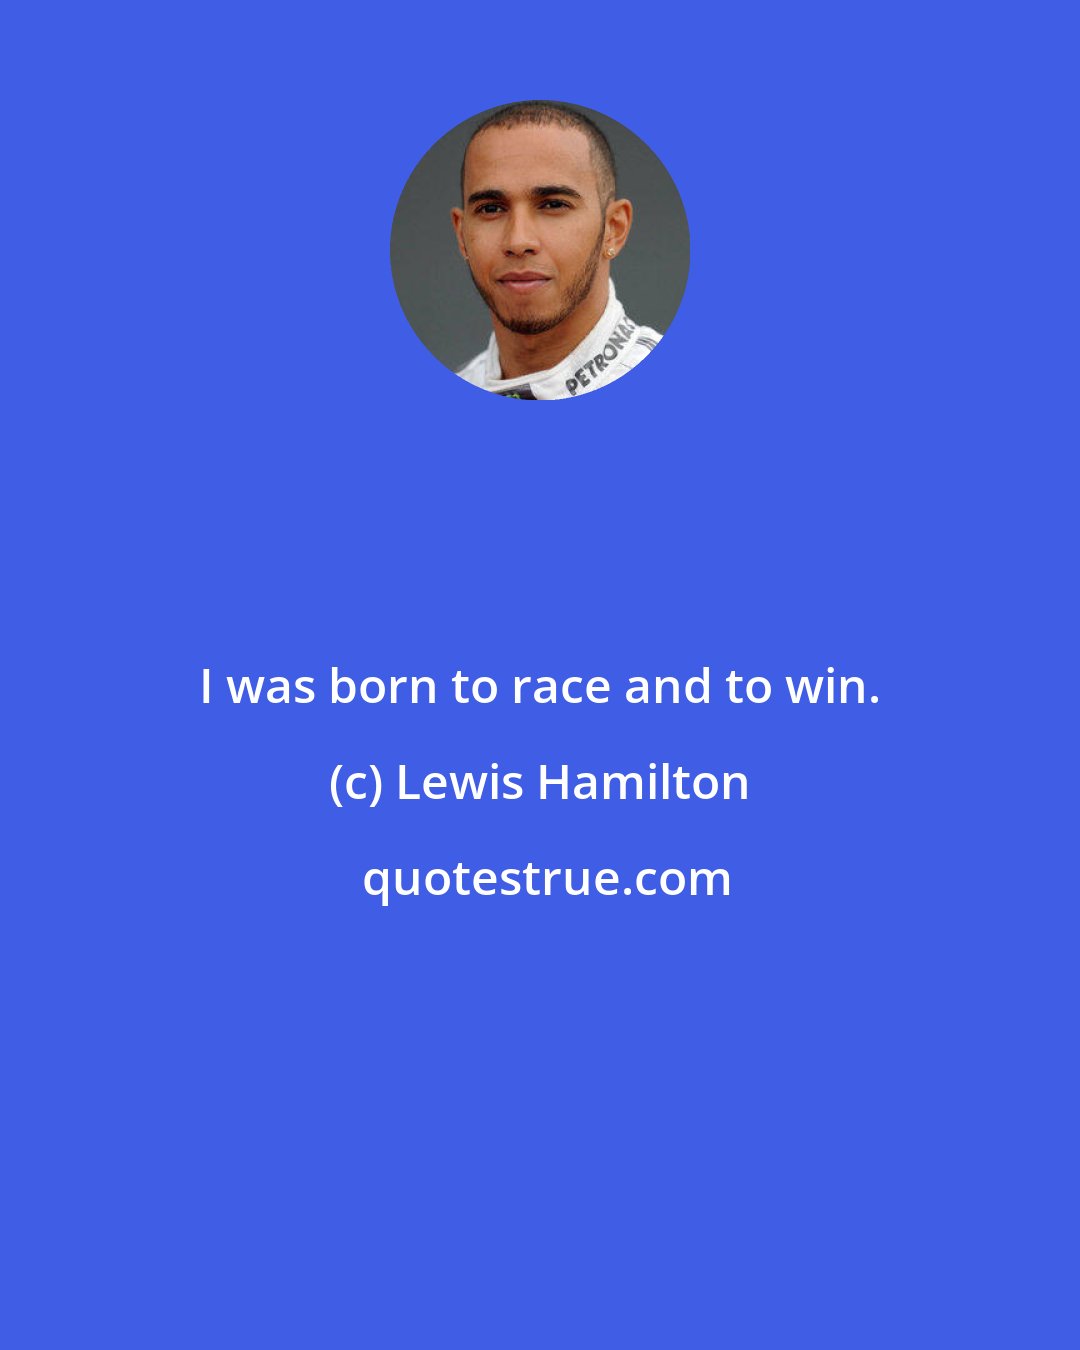 Lewis Hamilton: I was born to race and to win.